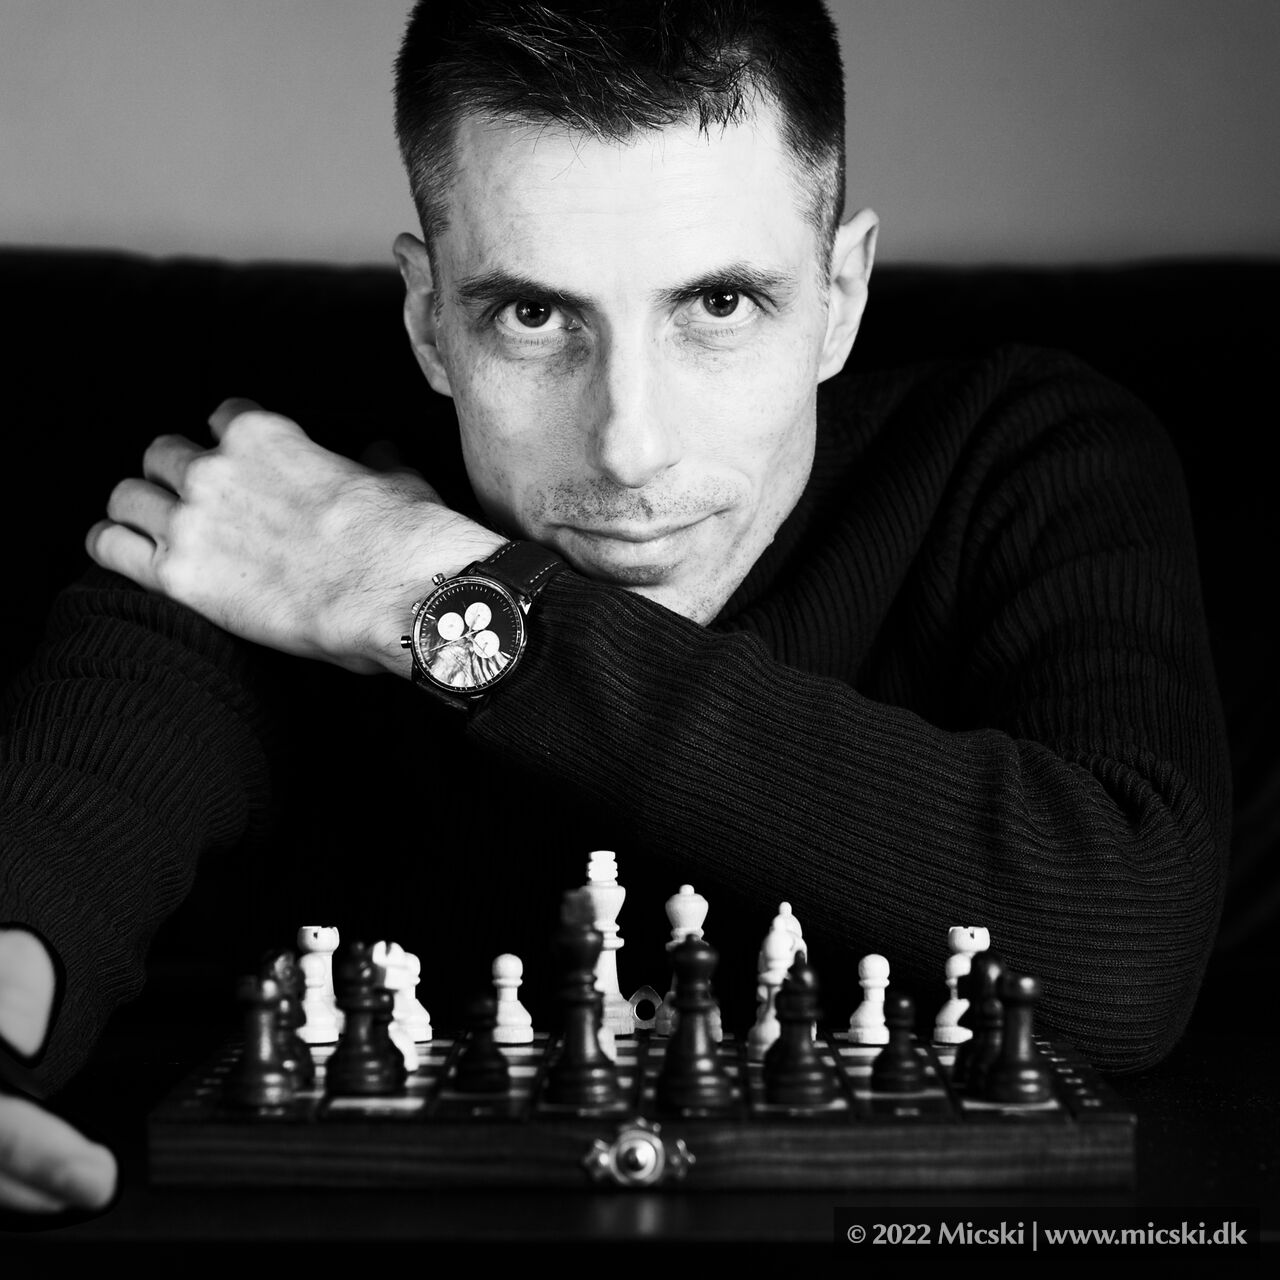 Self portrait photoshoot with chess theme in noir style.